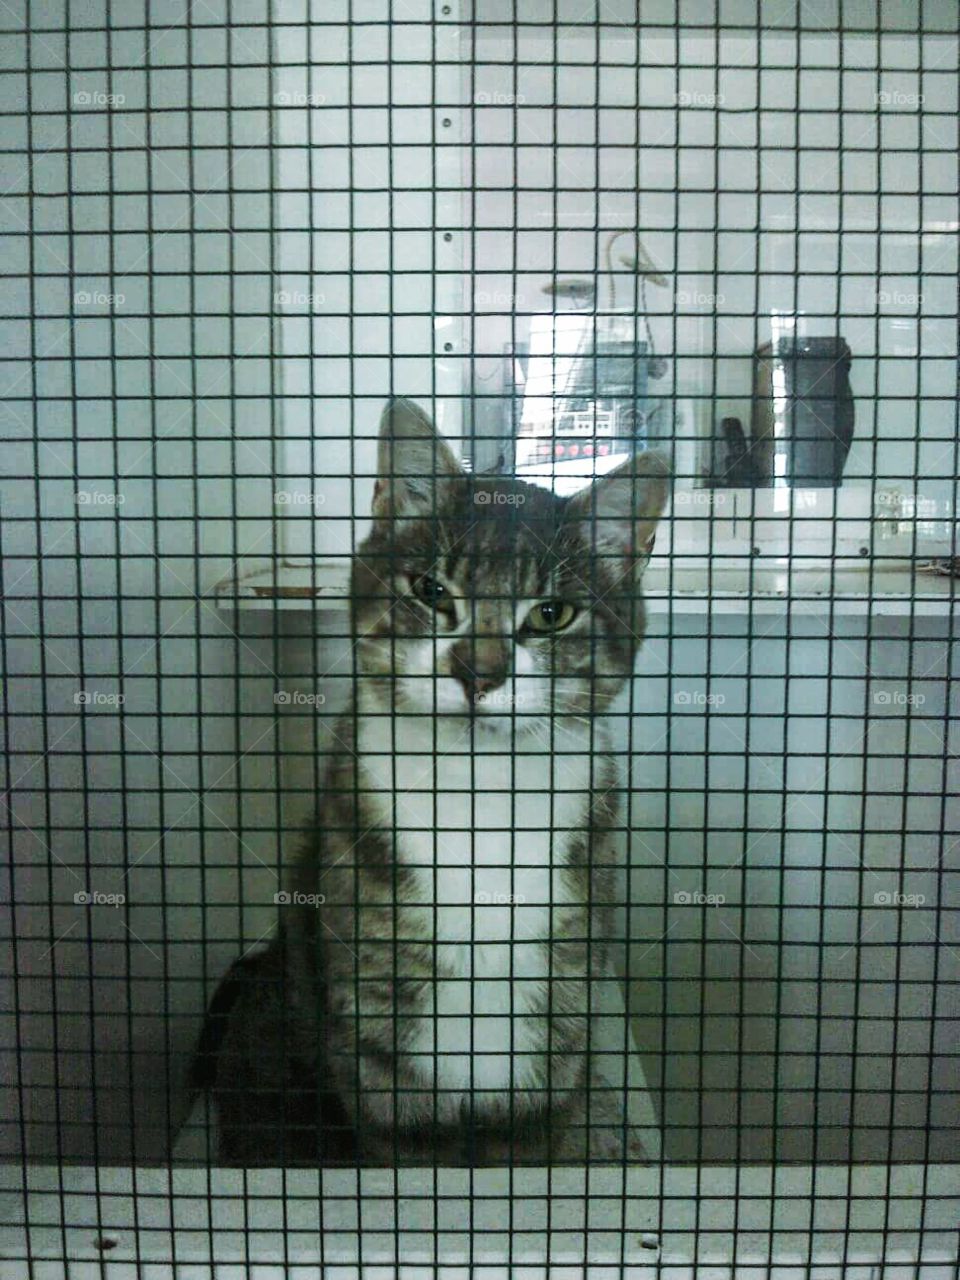 Cat in a cage? Or human in a cage?